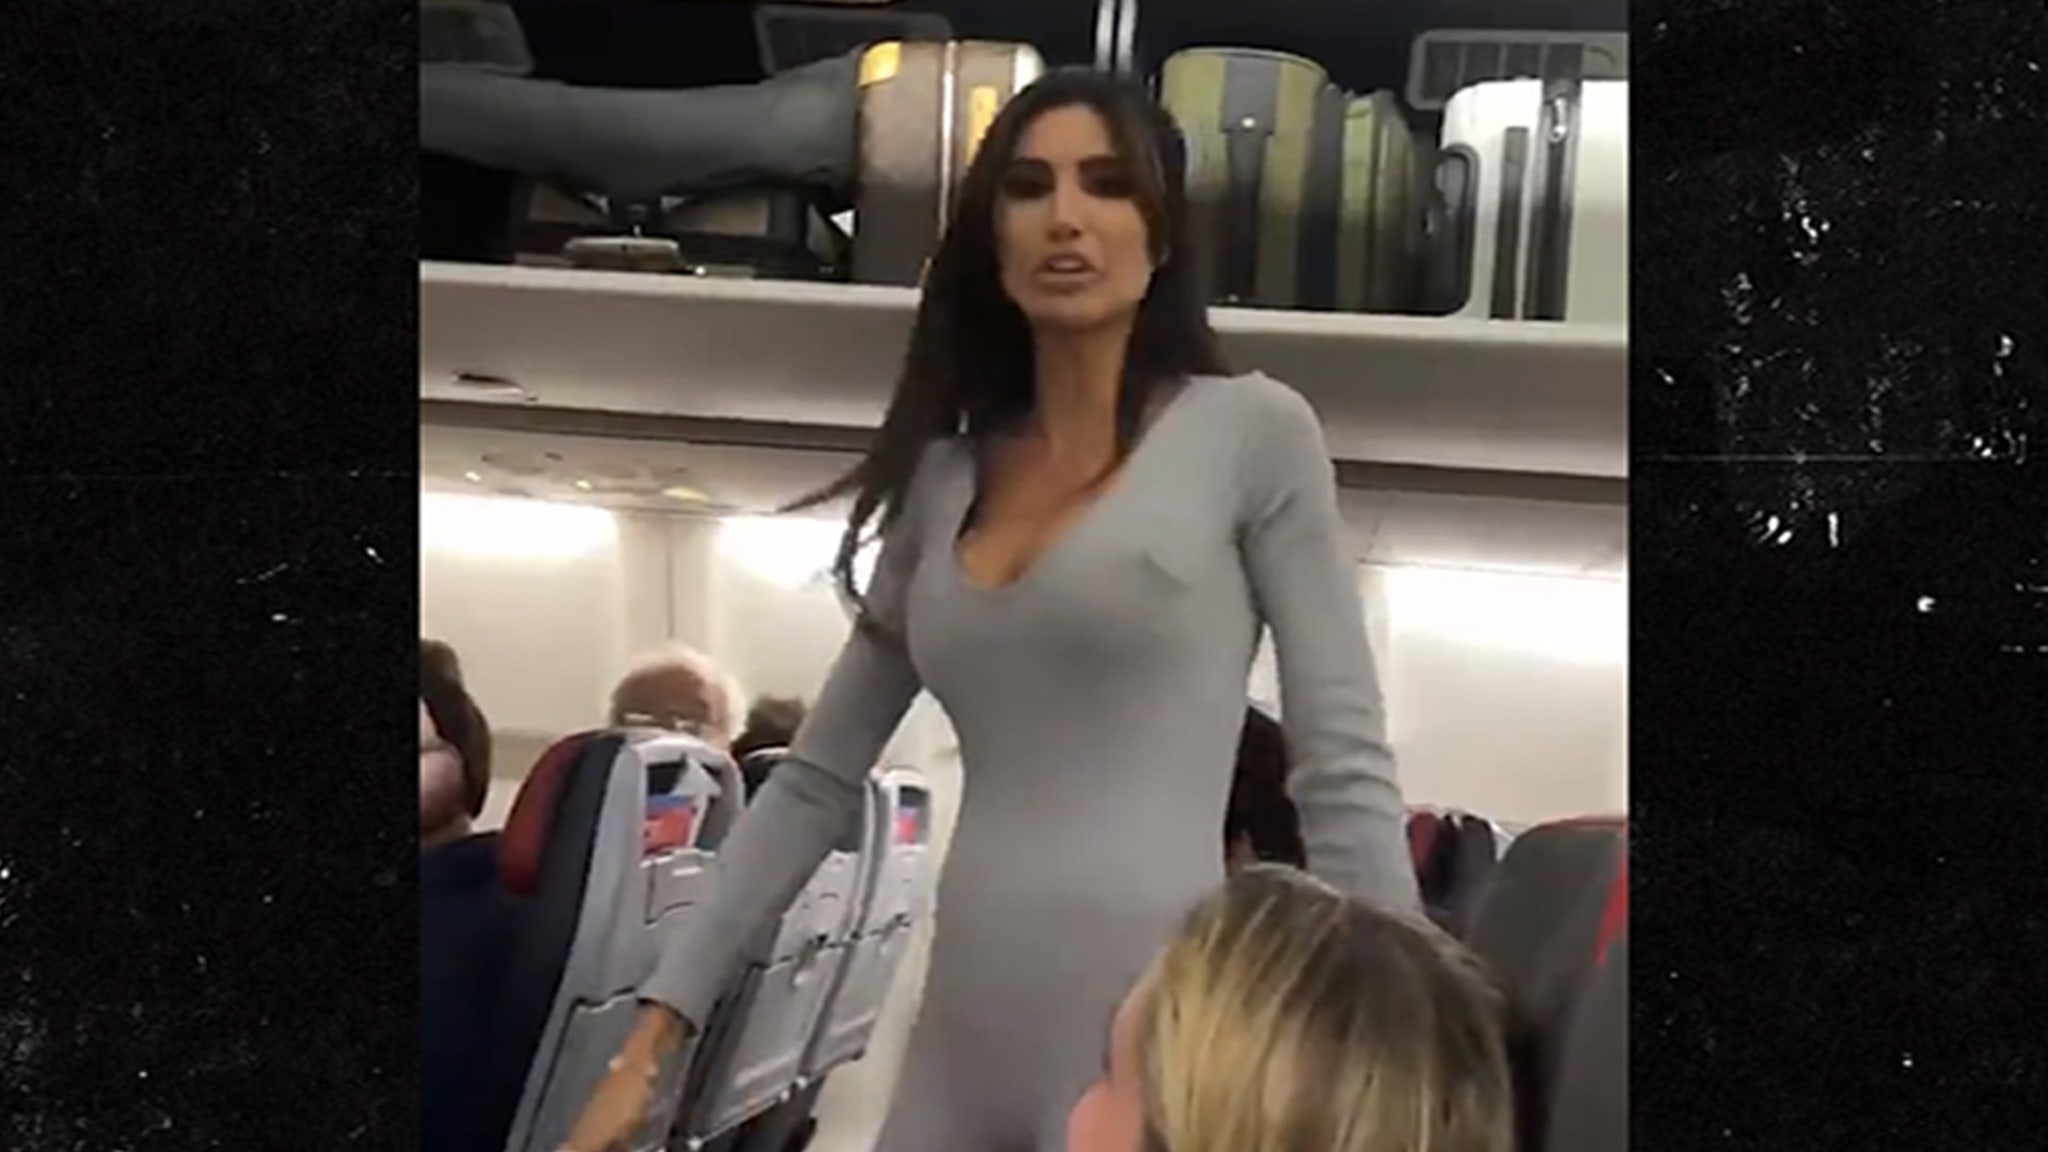 Sexy Woman in Bodysuit Kicked Off Plane, Claims She’s IG Famous